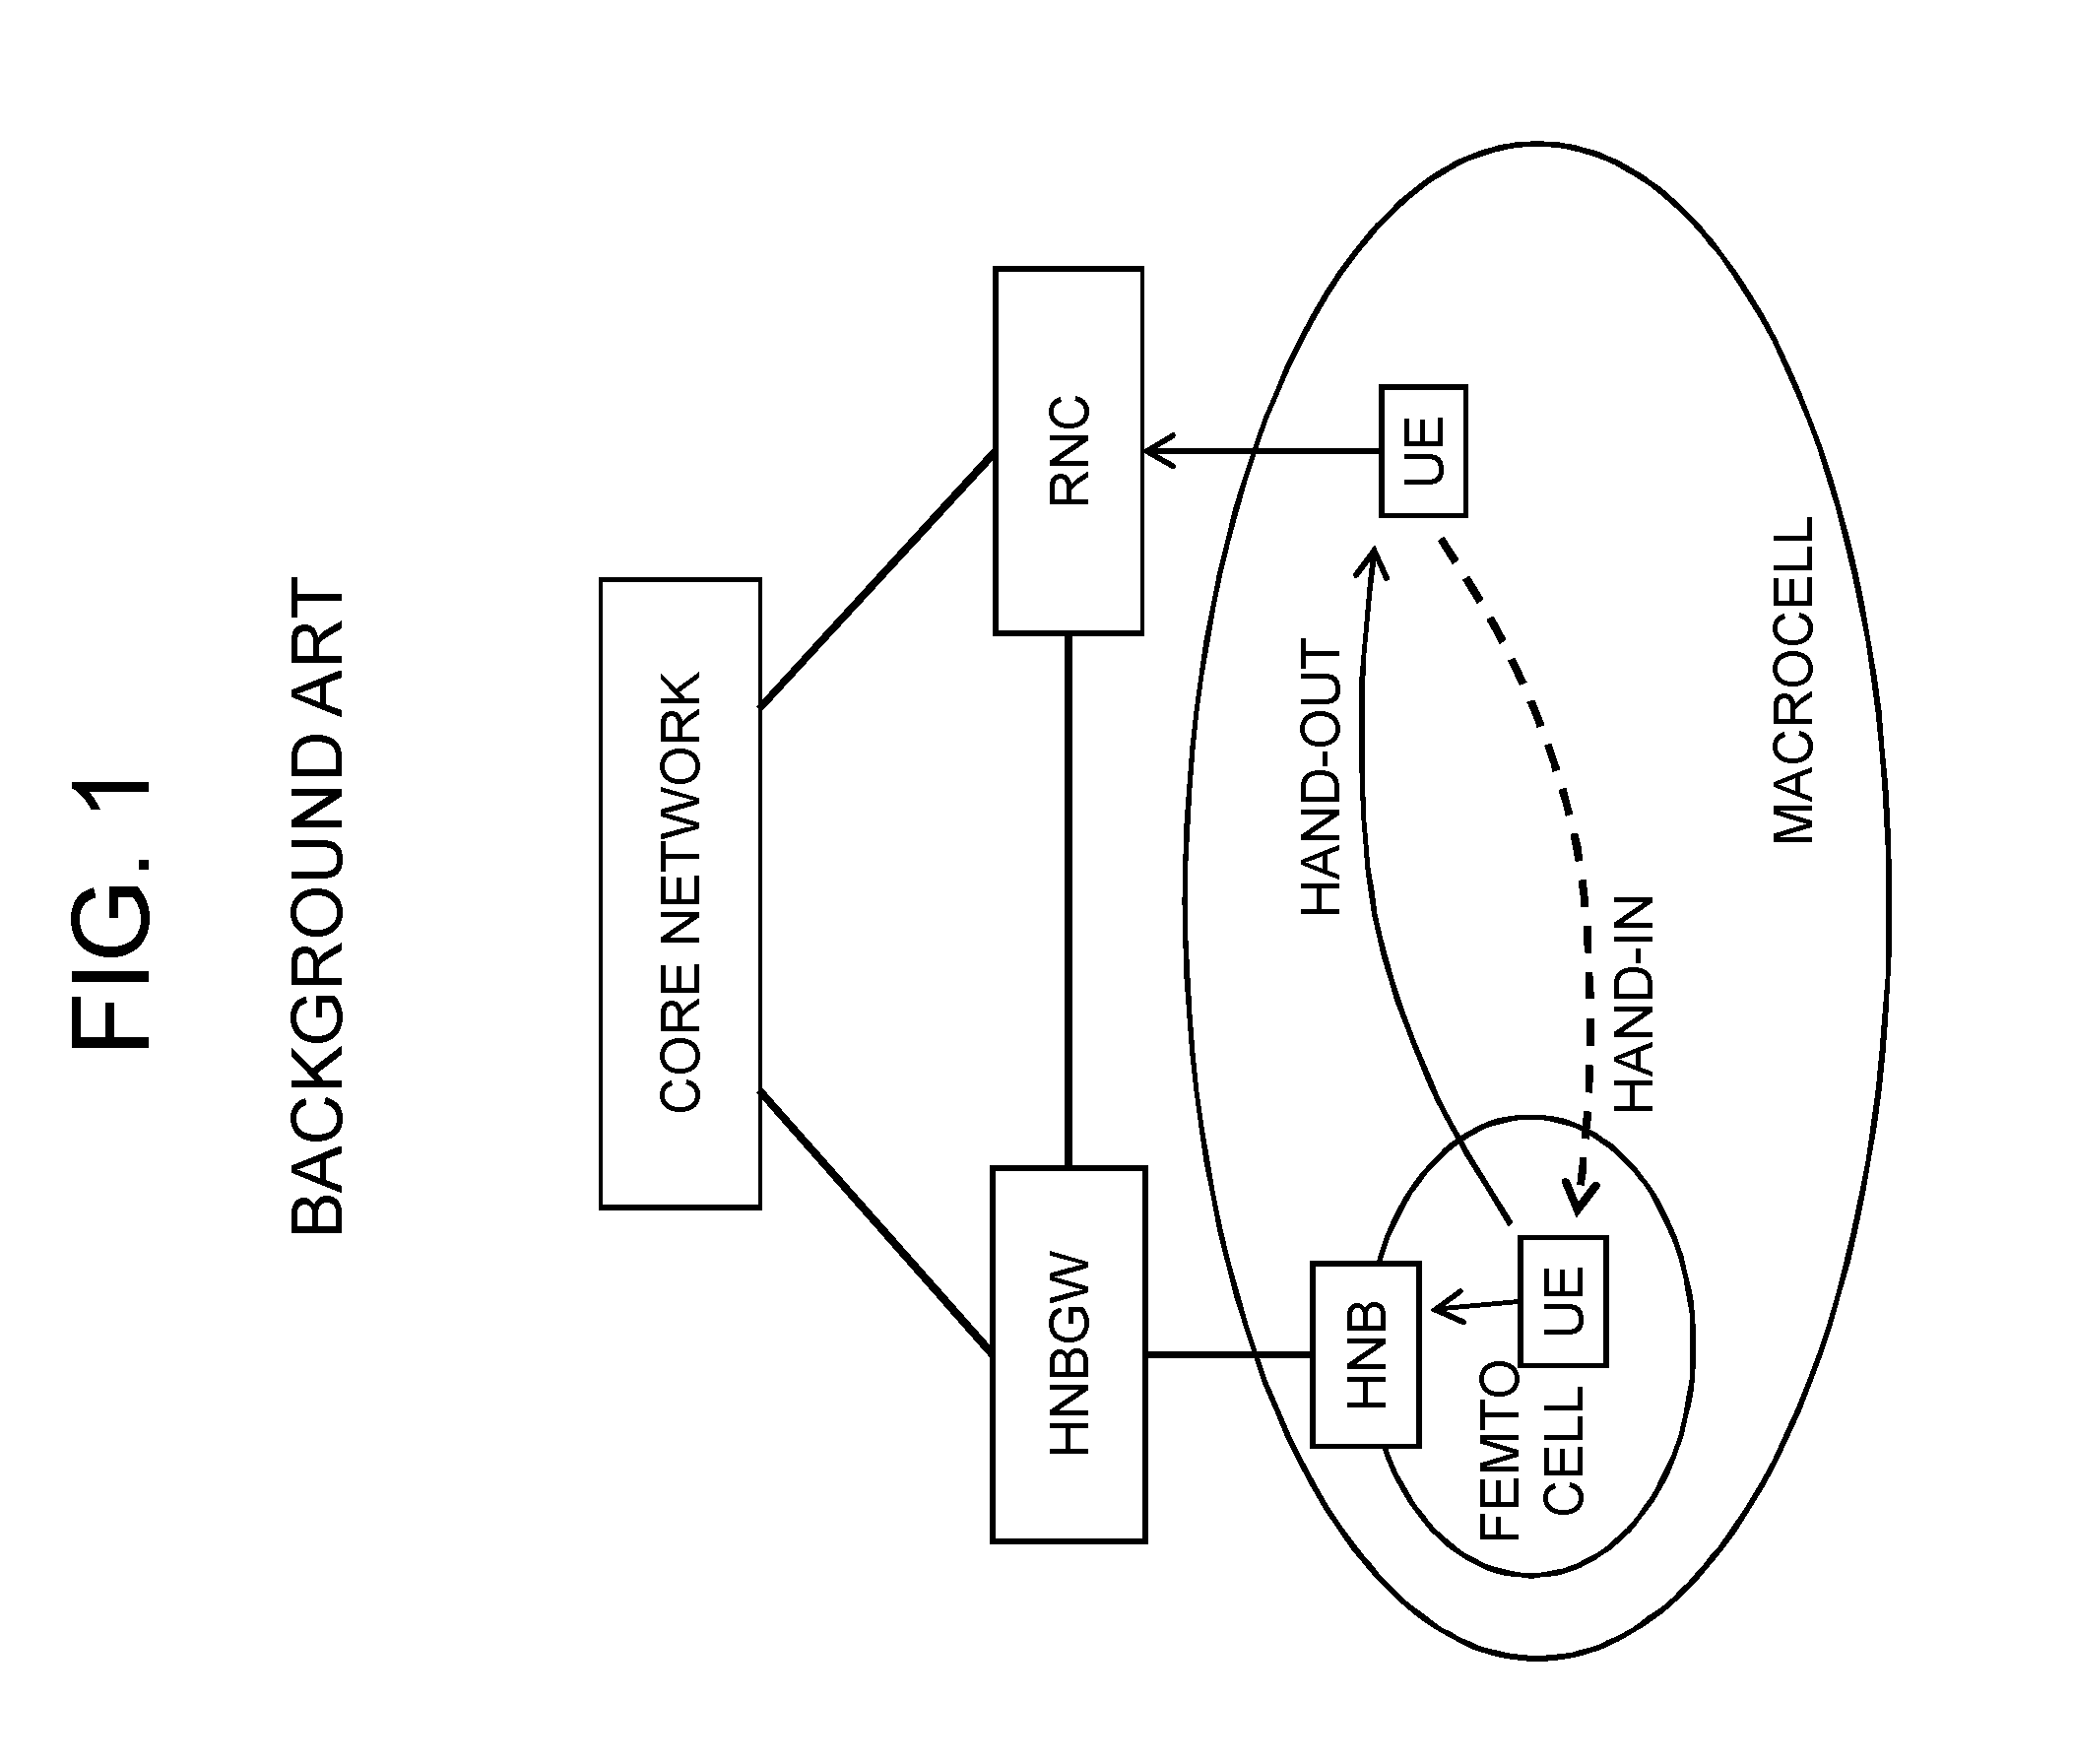 Method of handover control, relay apparatus, and method for selecting target cell in radio communication system